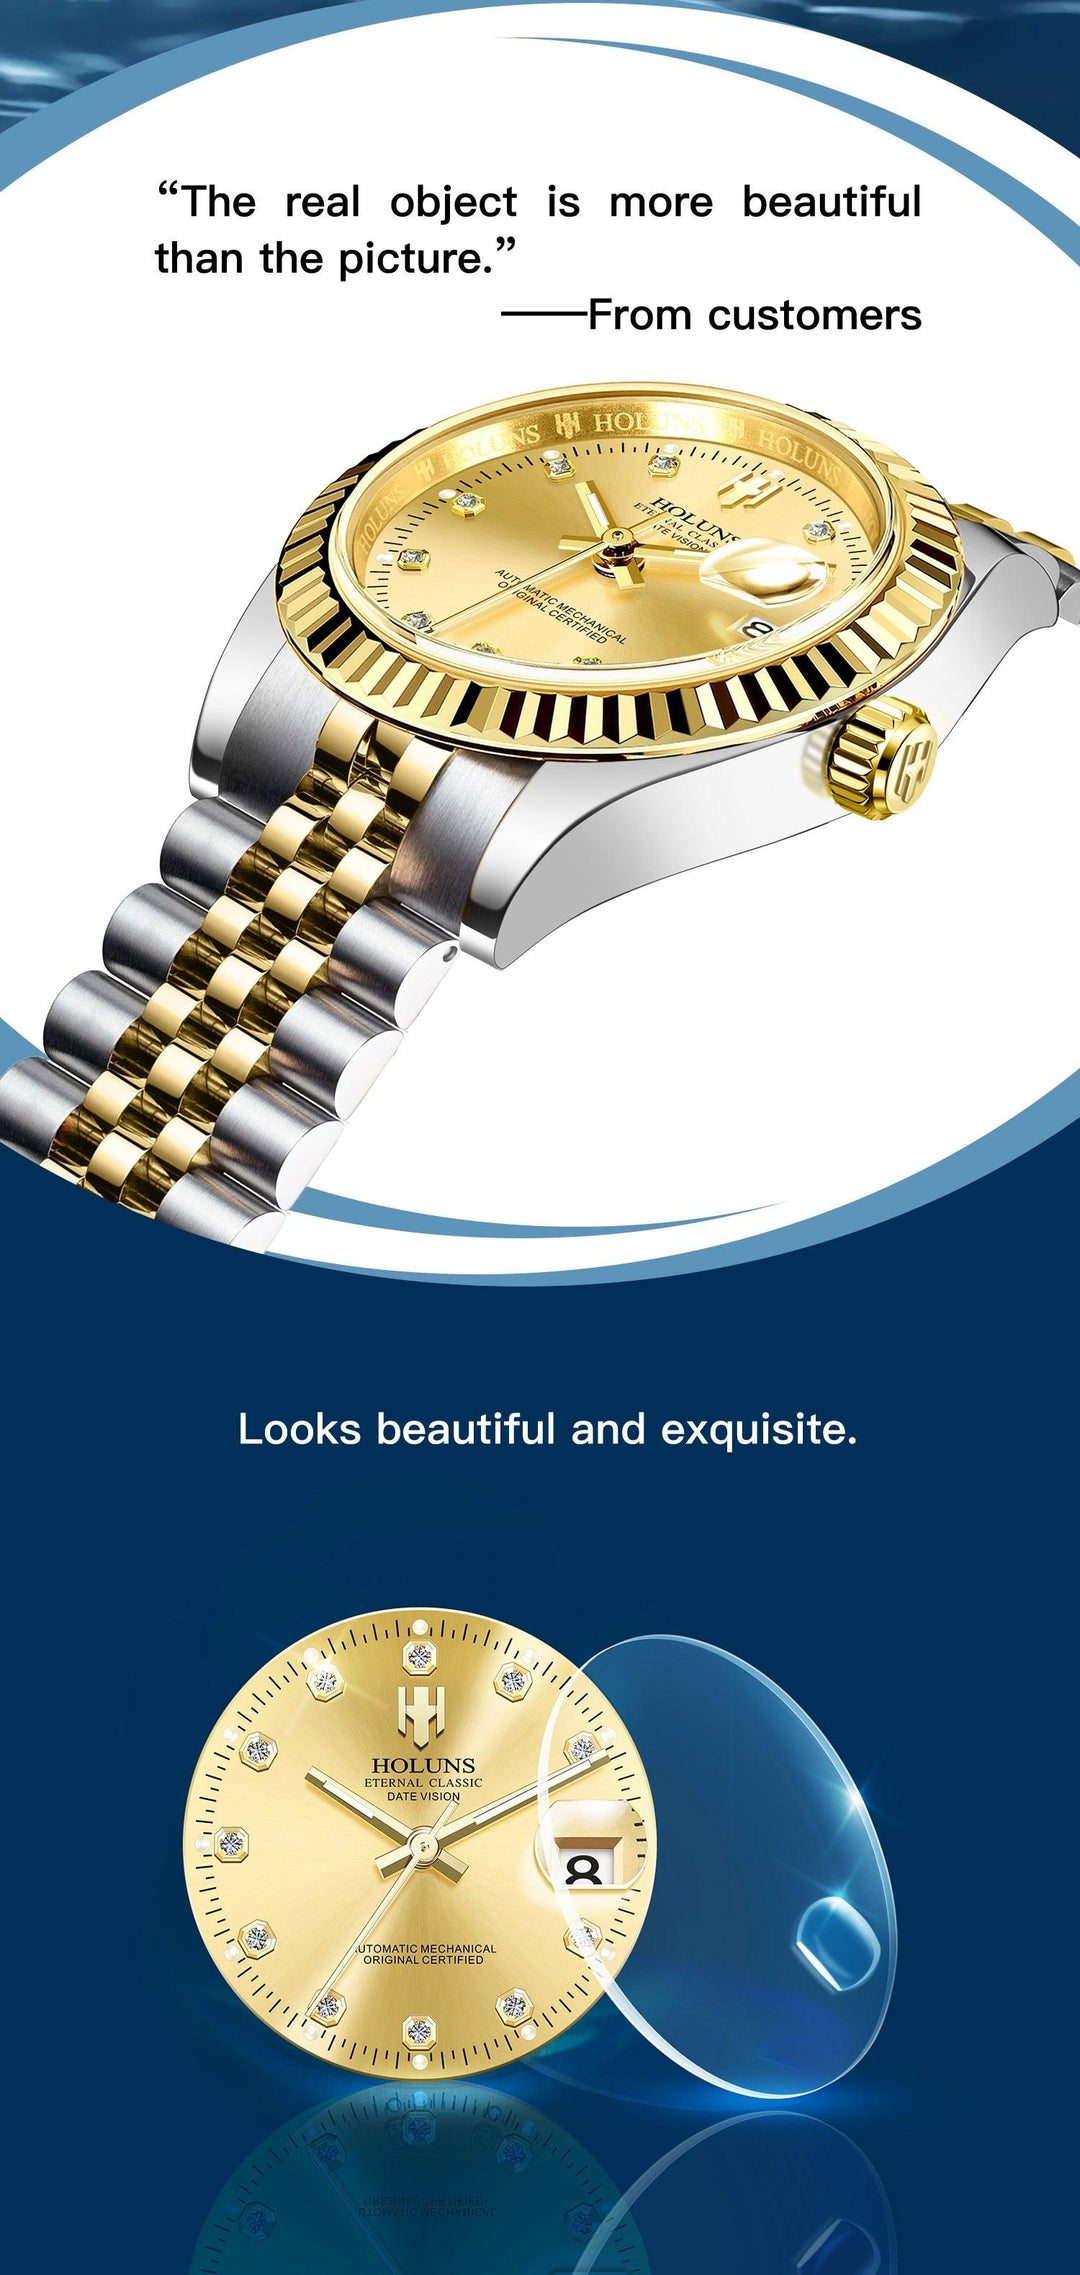 Holuns Datejust 41 Jewels Jubilee Homage Watches - Watches - Holuns - Viva Timepiece